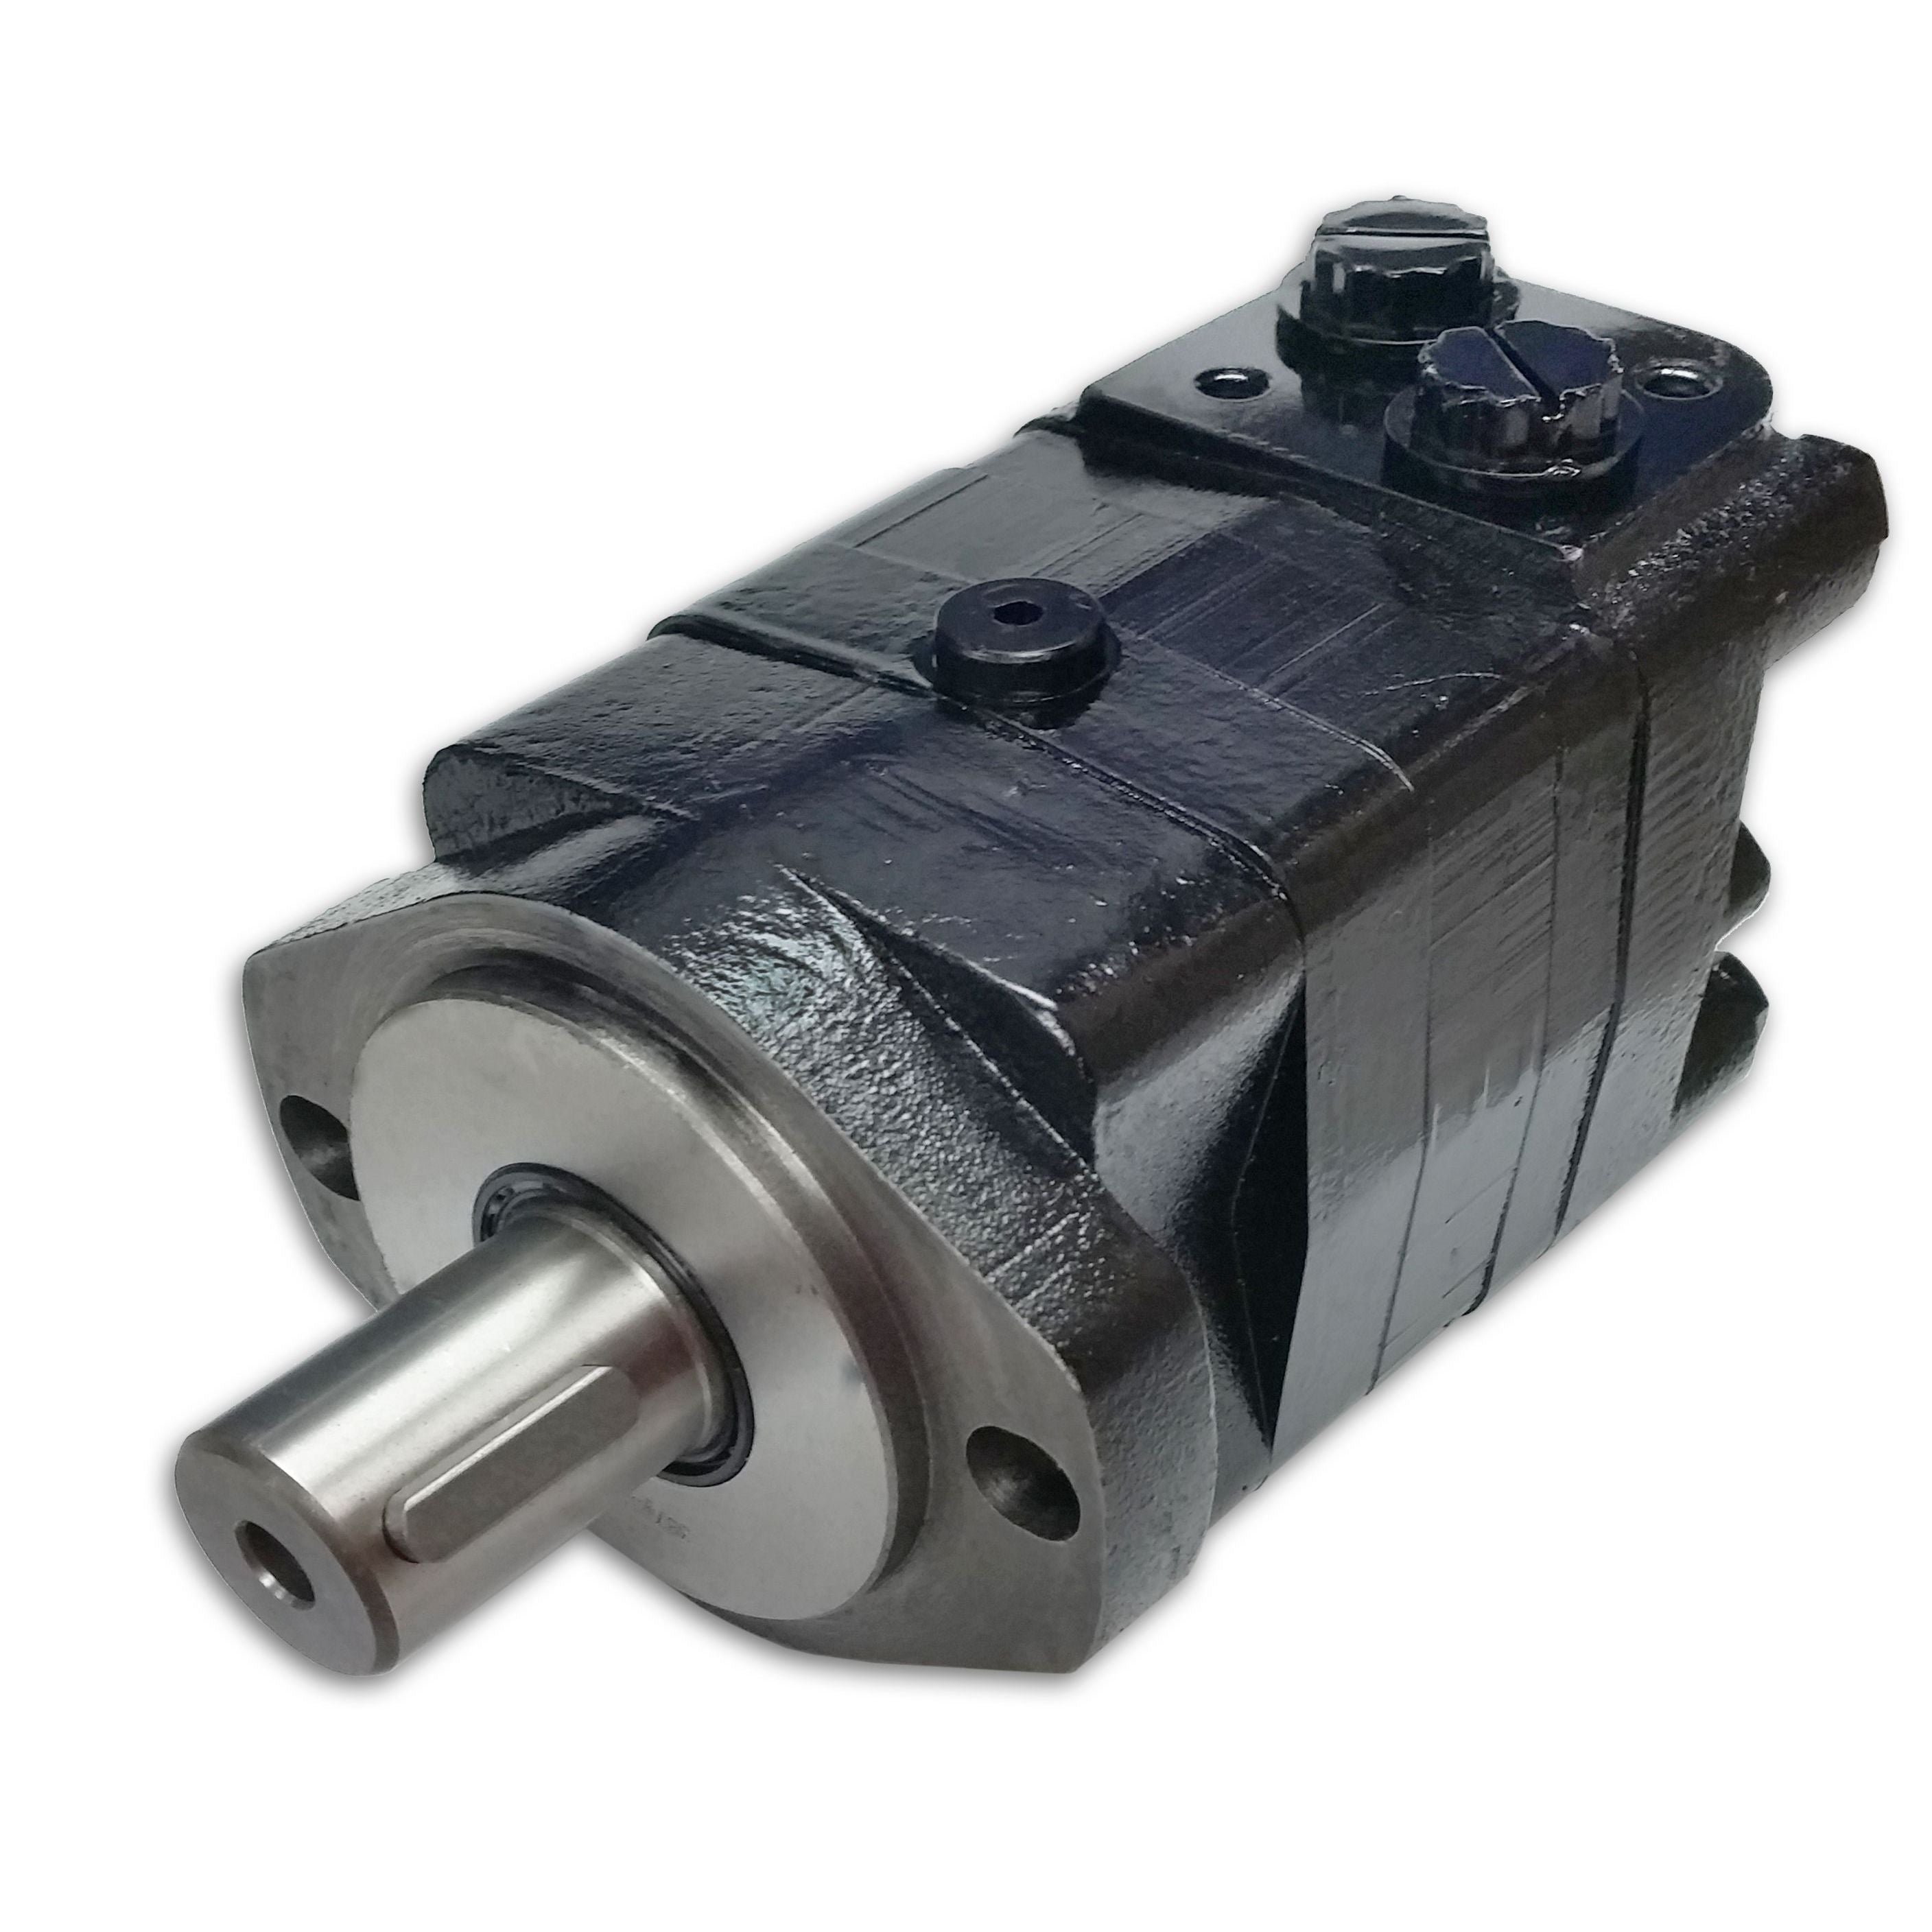 BMSY-400-E2-G-S : Dynamic LSHT Motor, 394cc, 185RPM, 7786in-lb, 2320psi Differential, 19.81GPM, SAE A 2-Bolt Mount, 1.25" Bore x 5/16" Key Shaft, Side Ported, #10 SAE (5/8")